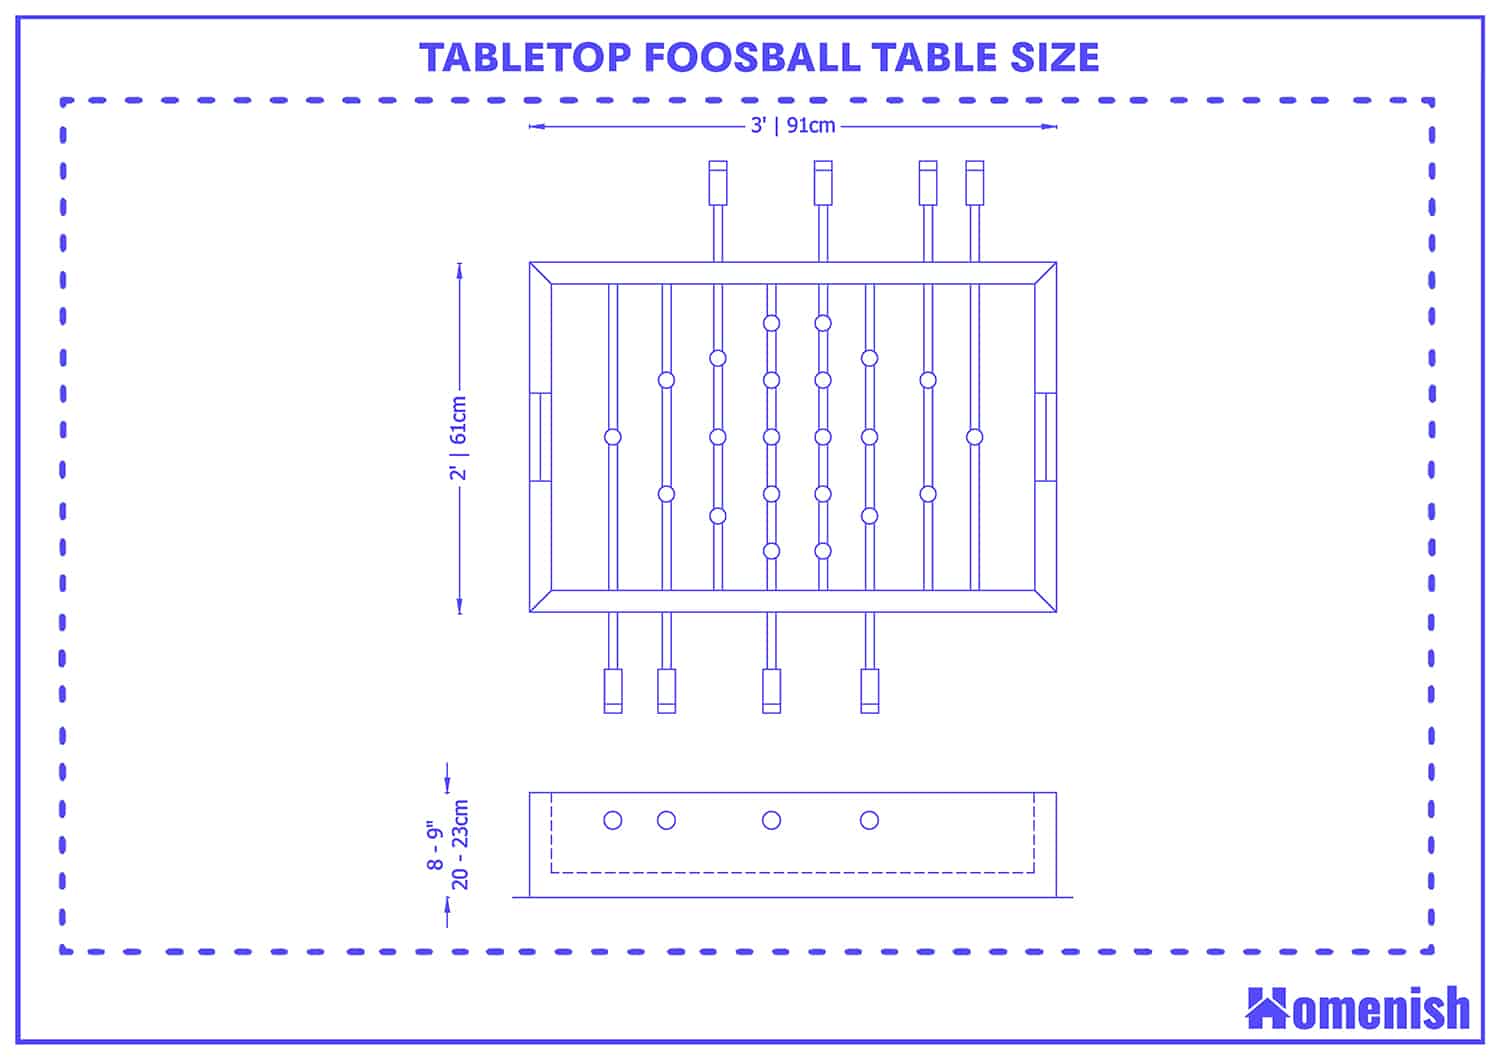 Tabletop Foosball Table Size